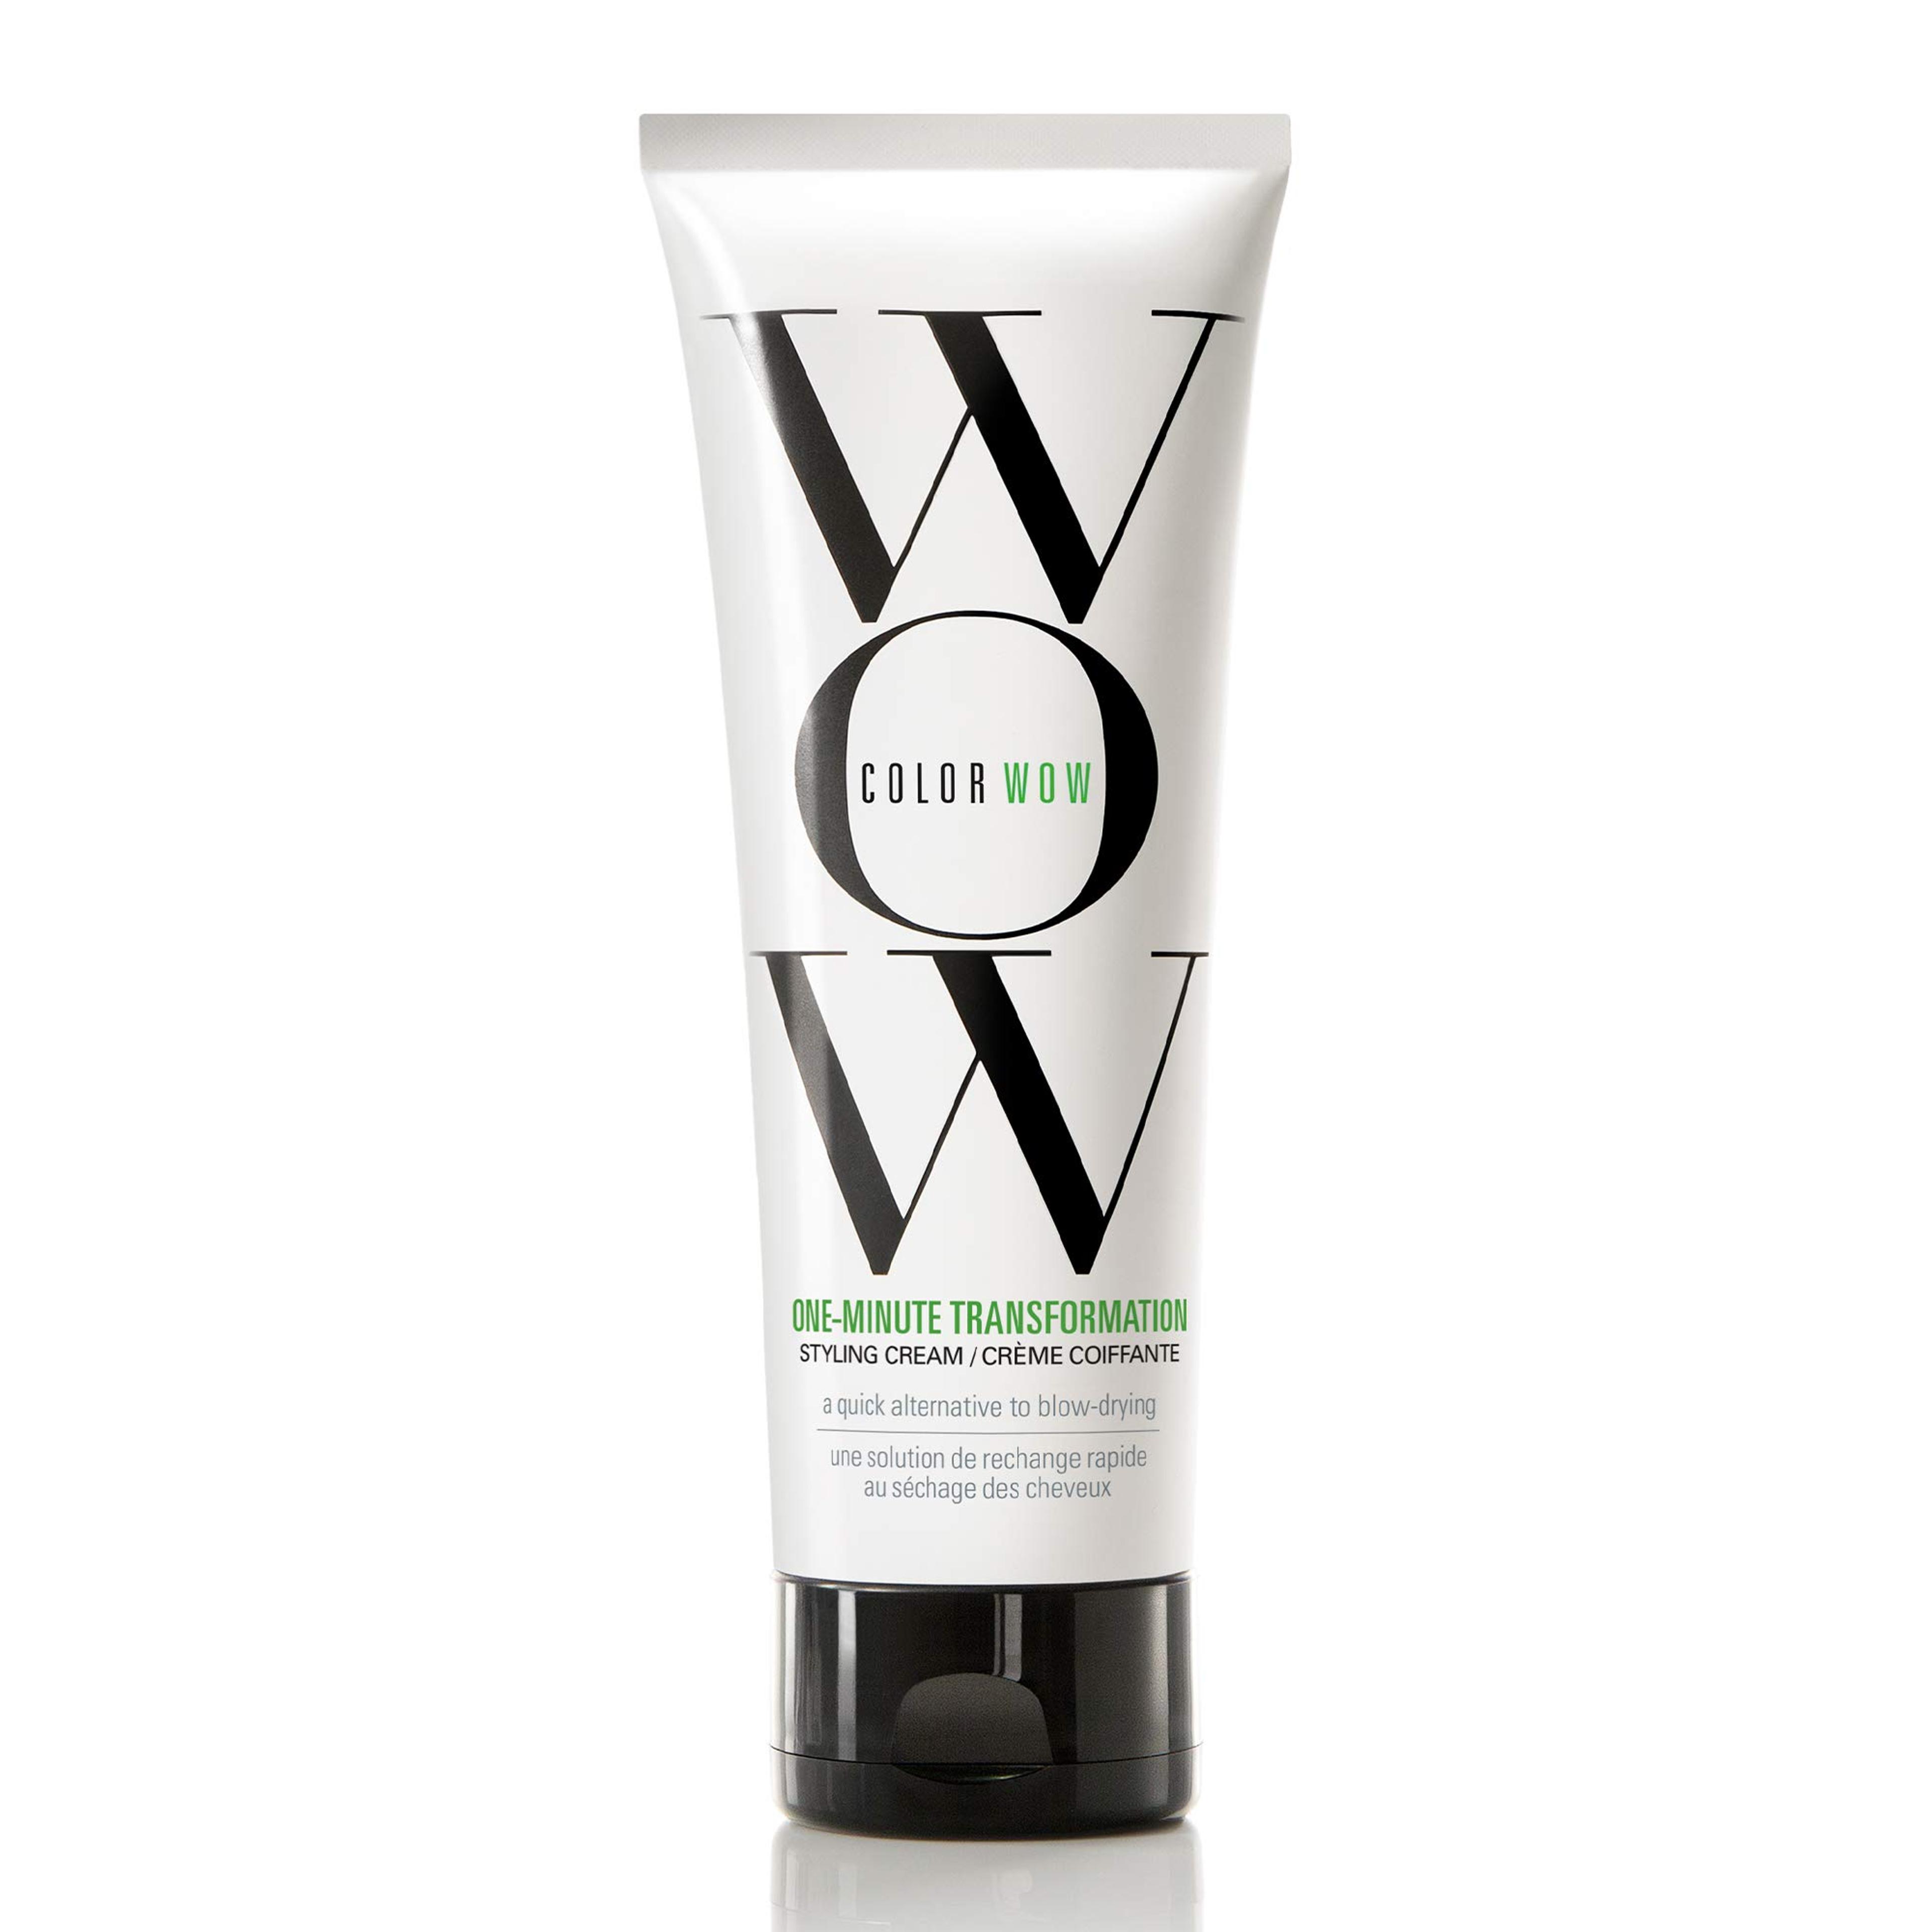 Color Wow One-Minute Transformation â€“ Instant frizz fix; Nourishing styling cream smooths, tames + defrizzes on-the-spot; Avocado oil + Omega 3â€™s hydrate, repair for silkier, smoother texture